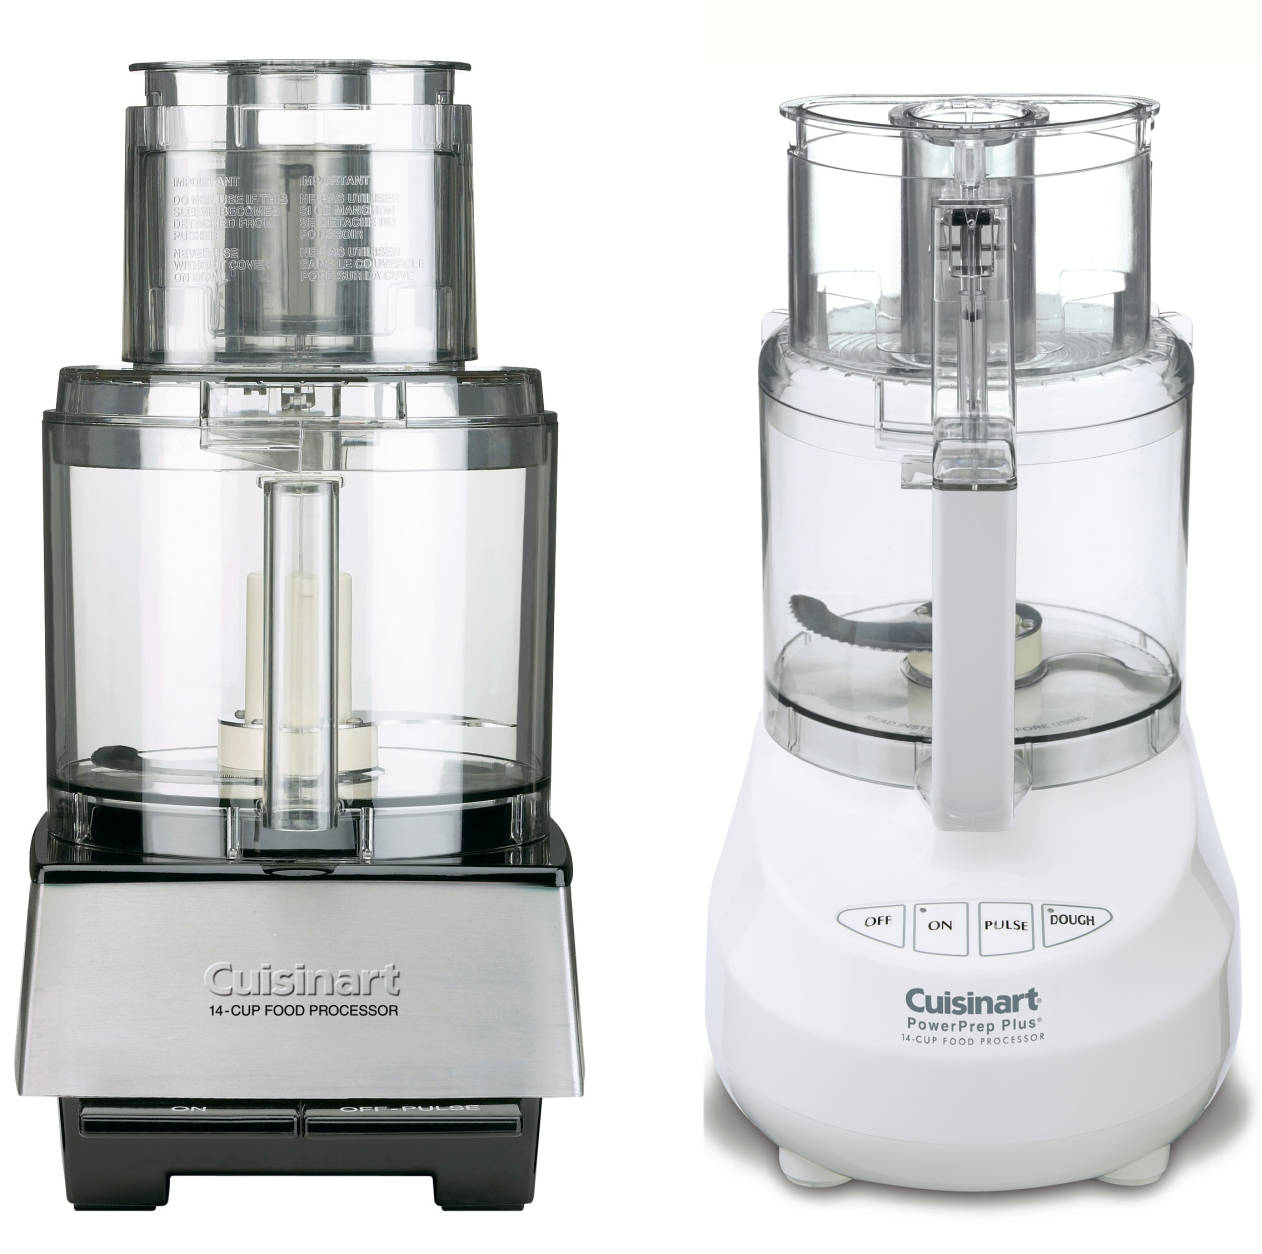 Here are examples of Cuisinart processors with riveted blades. (Courtesy Cuisinart)